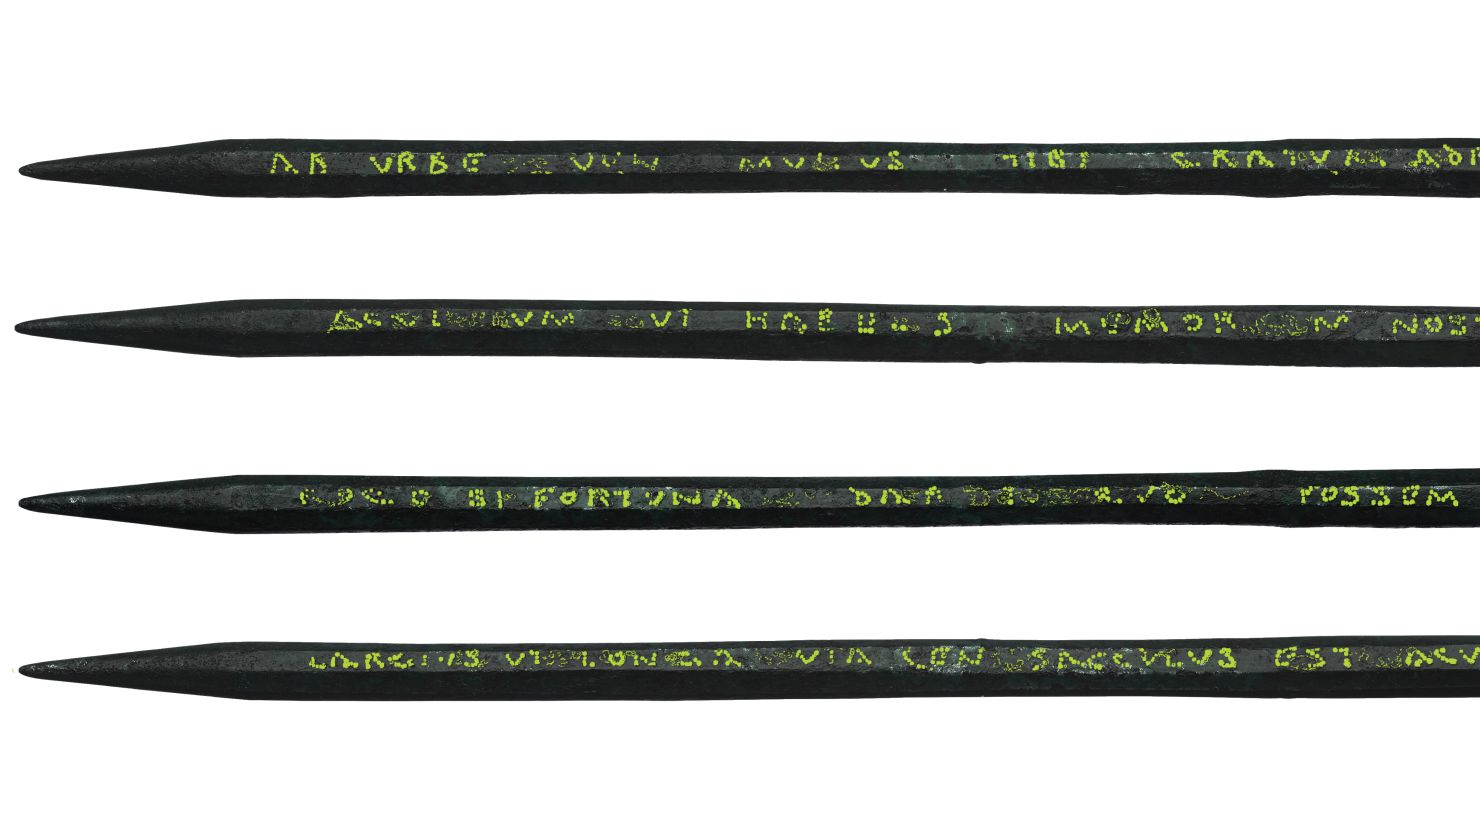 Ancient Roman pen with an inscribed joke found under streets of London